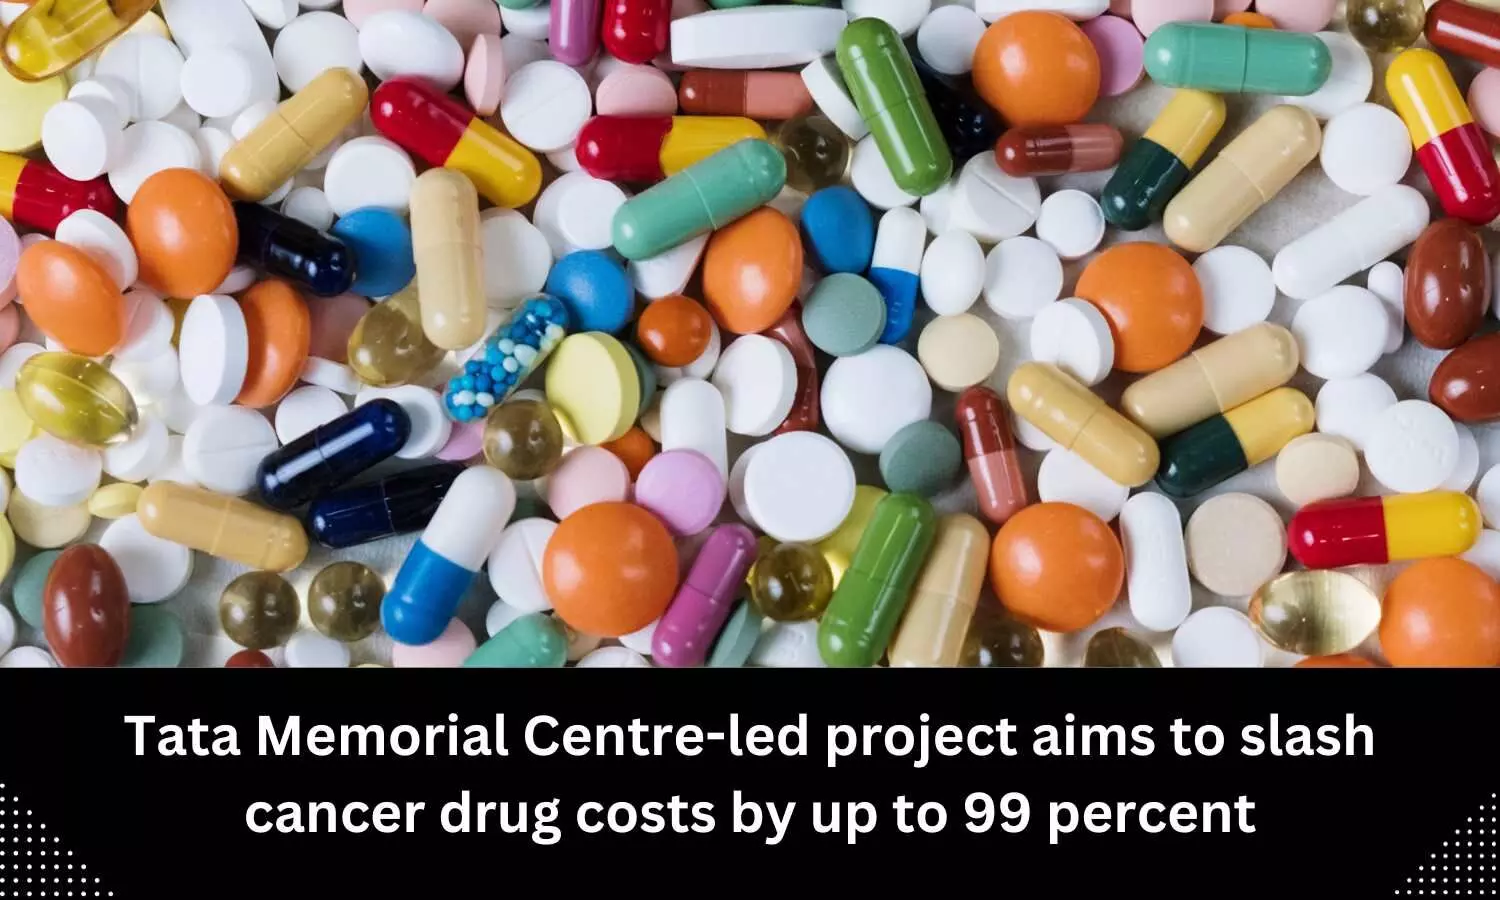 Tata Memorial Centre-led project aims to slash cancer drug costs by up to 99 percent